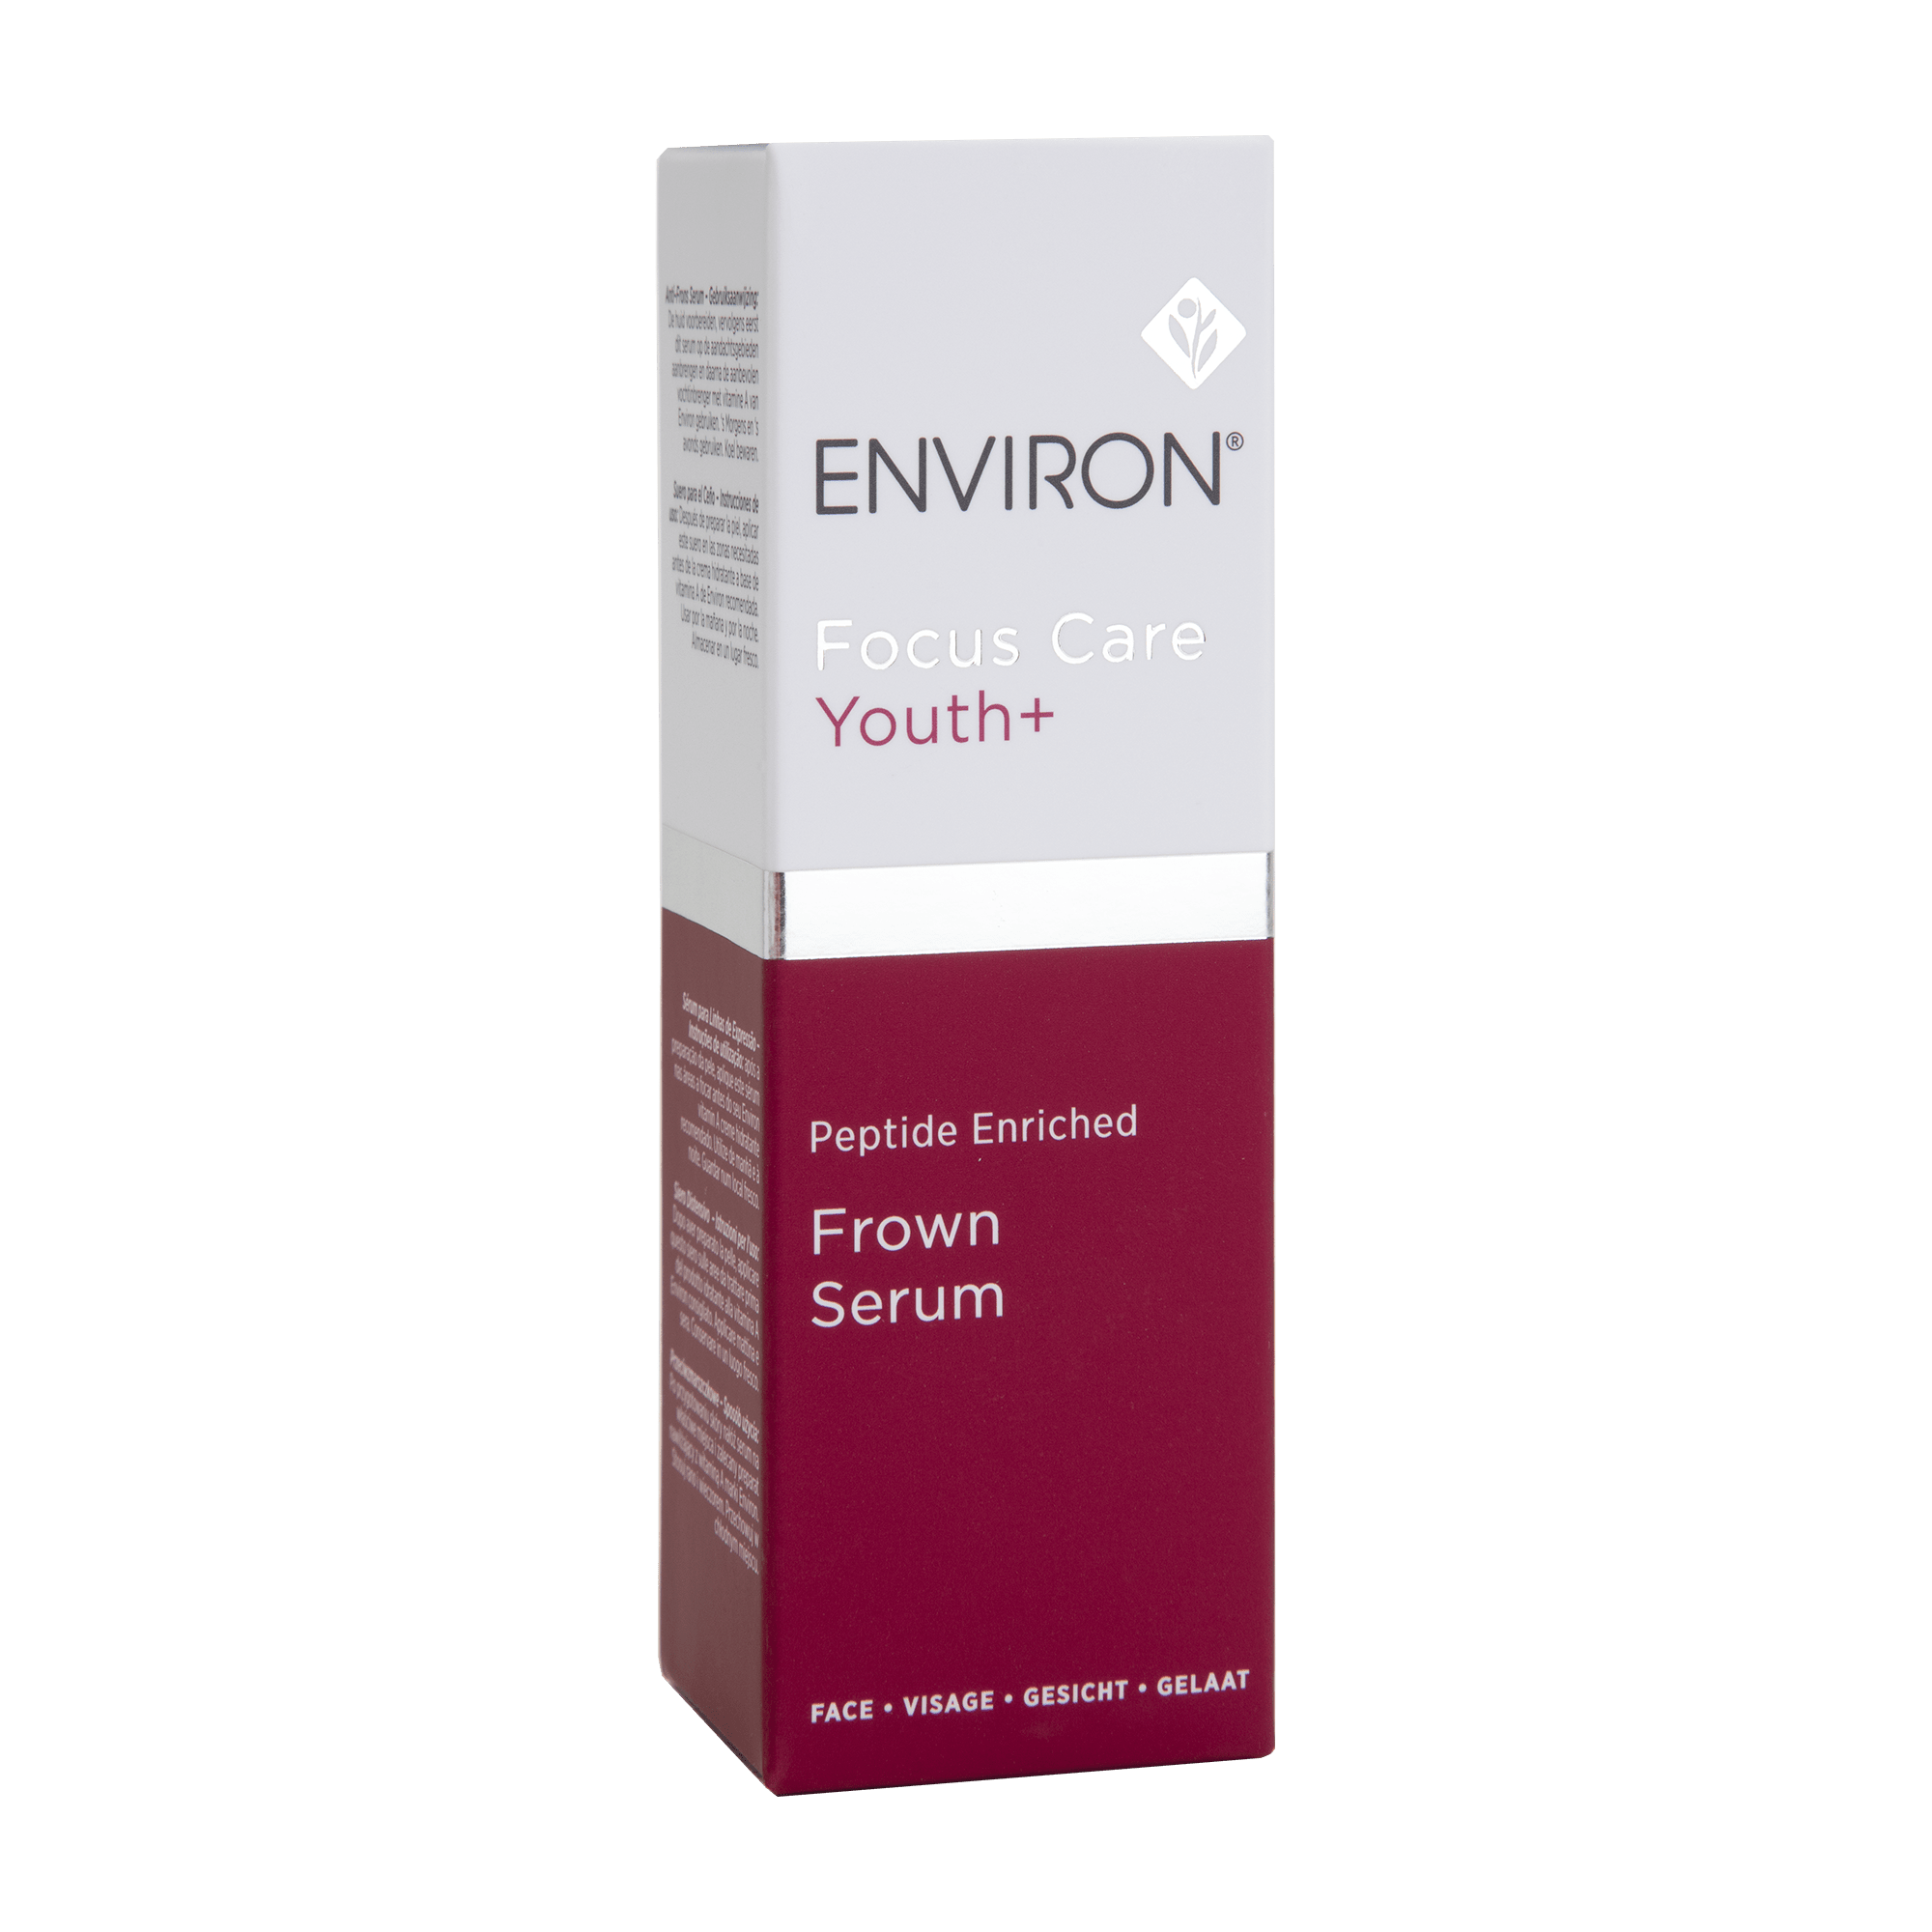 Peptide Enriched Frown Serum | Youth+ | Environ